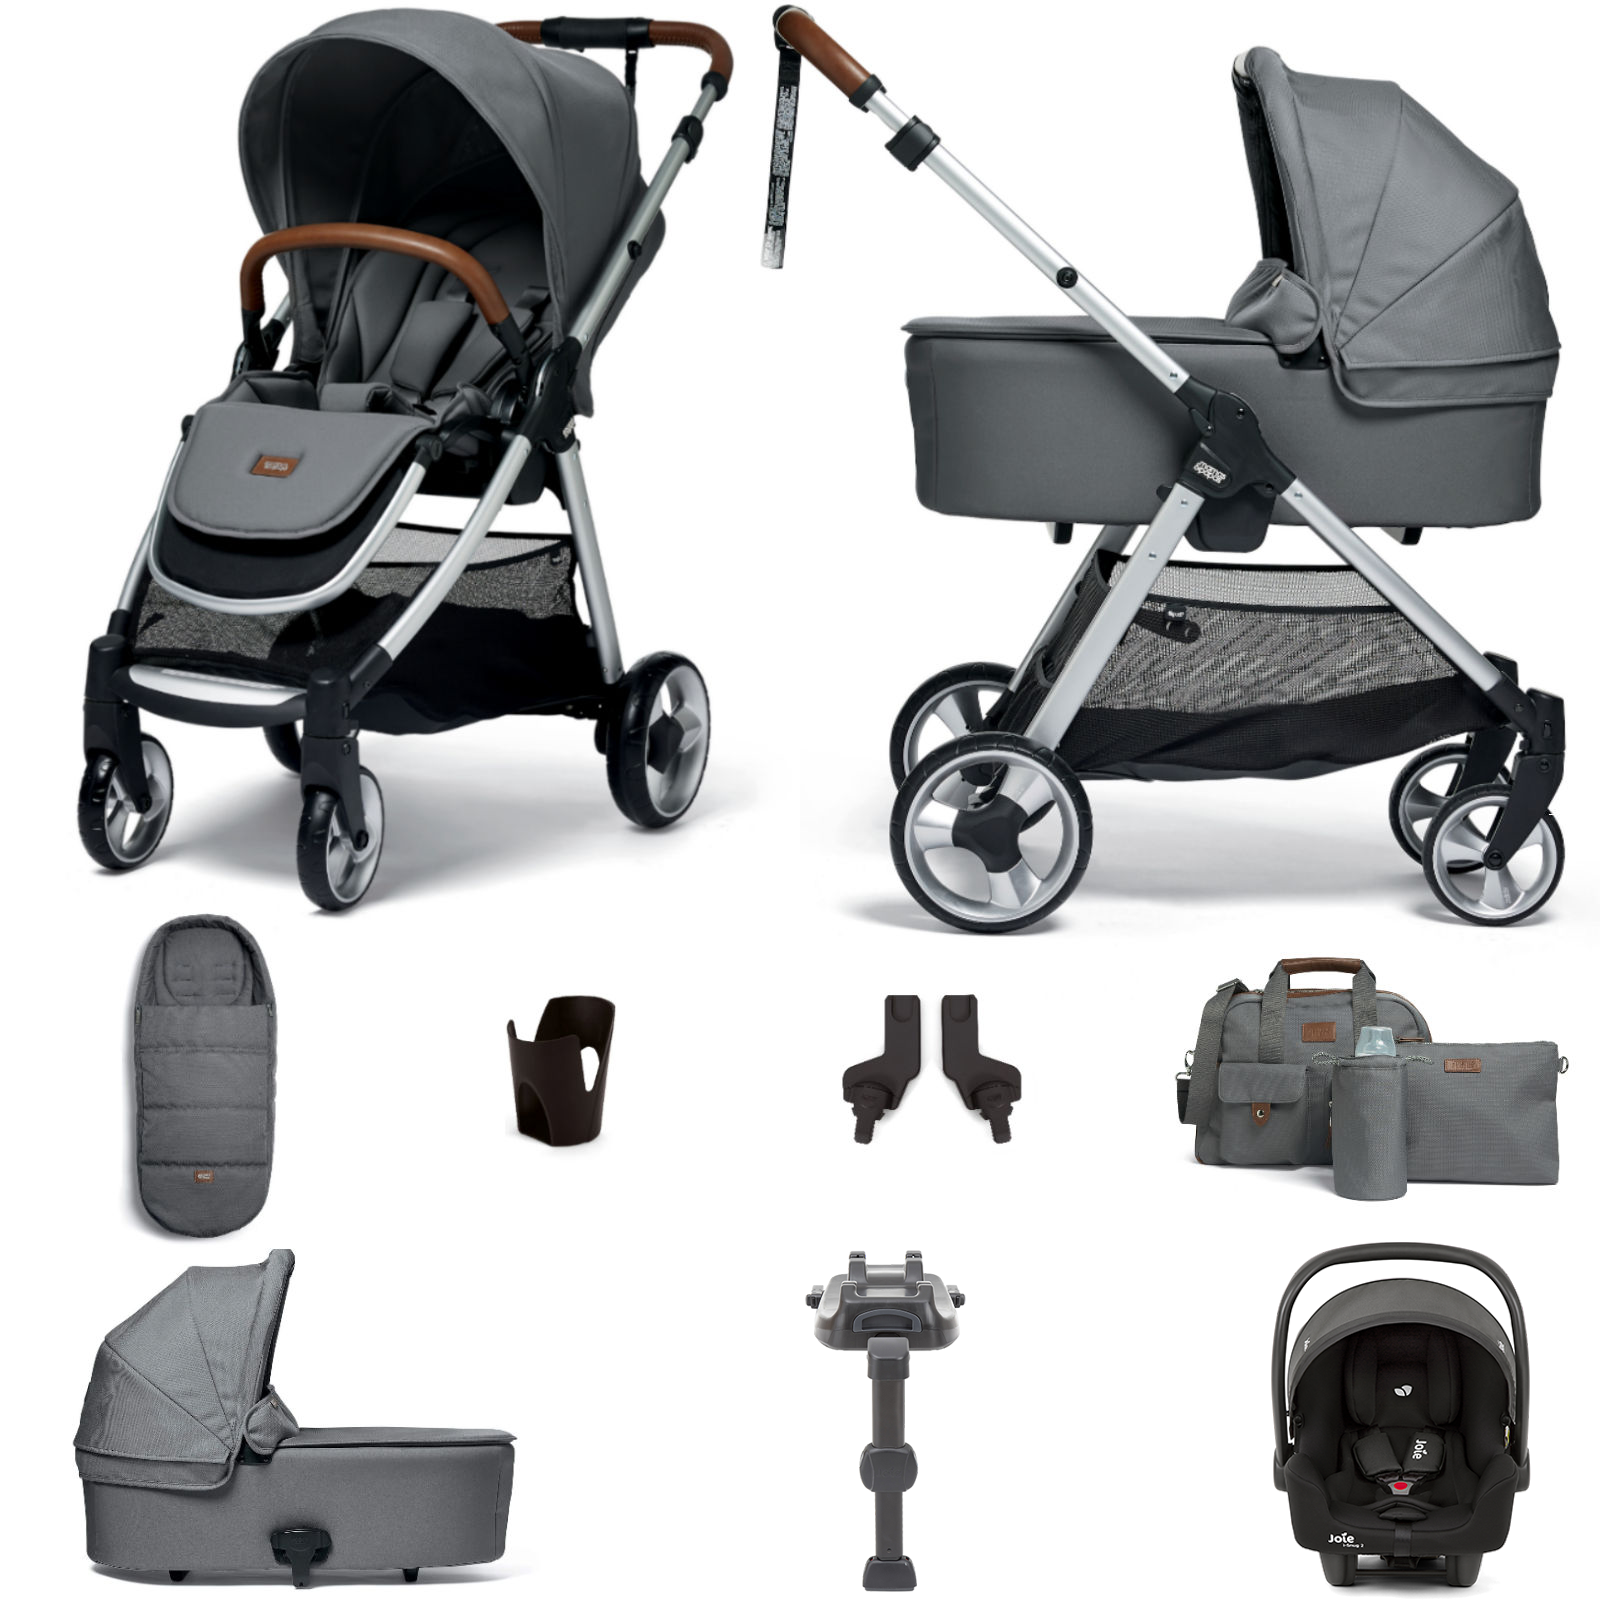 Mamas & Papas Flip XT2 8pc Essentials (i-Size 2 Car Seat) Travel System with Carrycot & ISOFIX Base - Fossil Grey